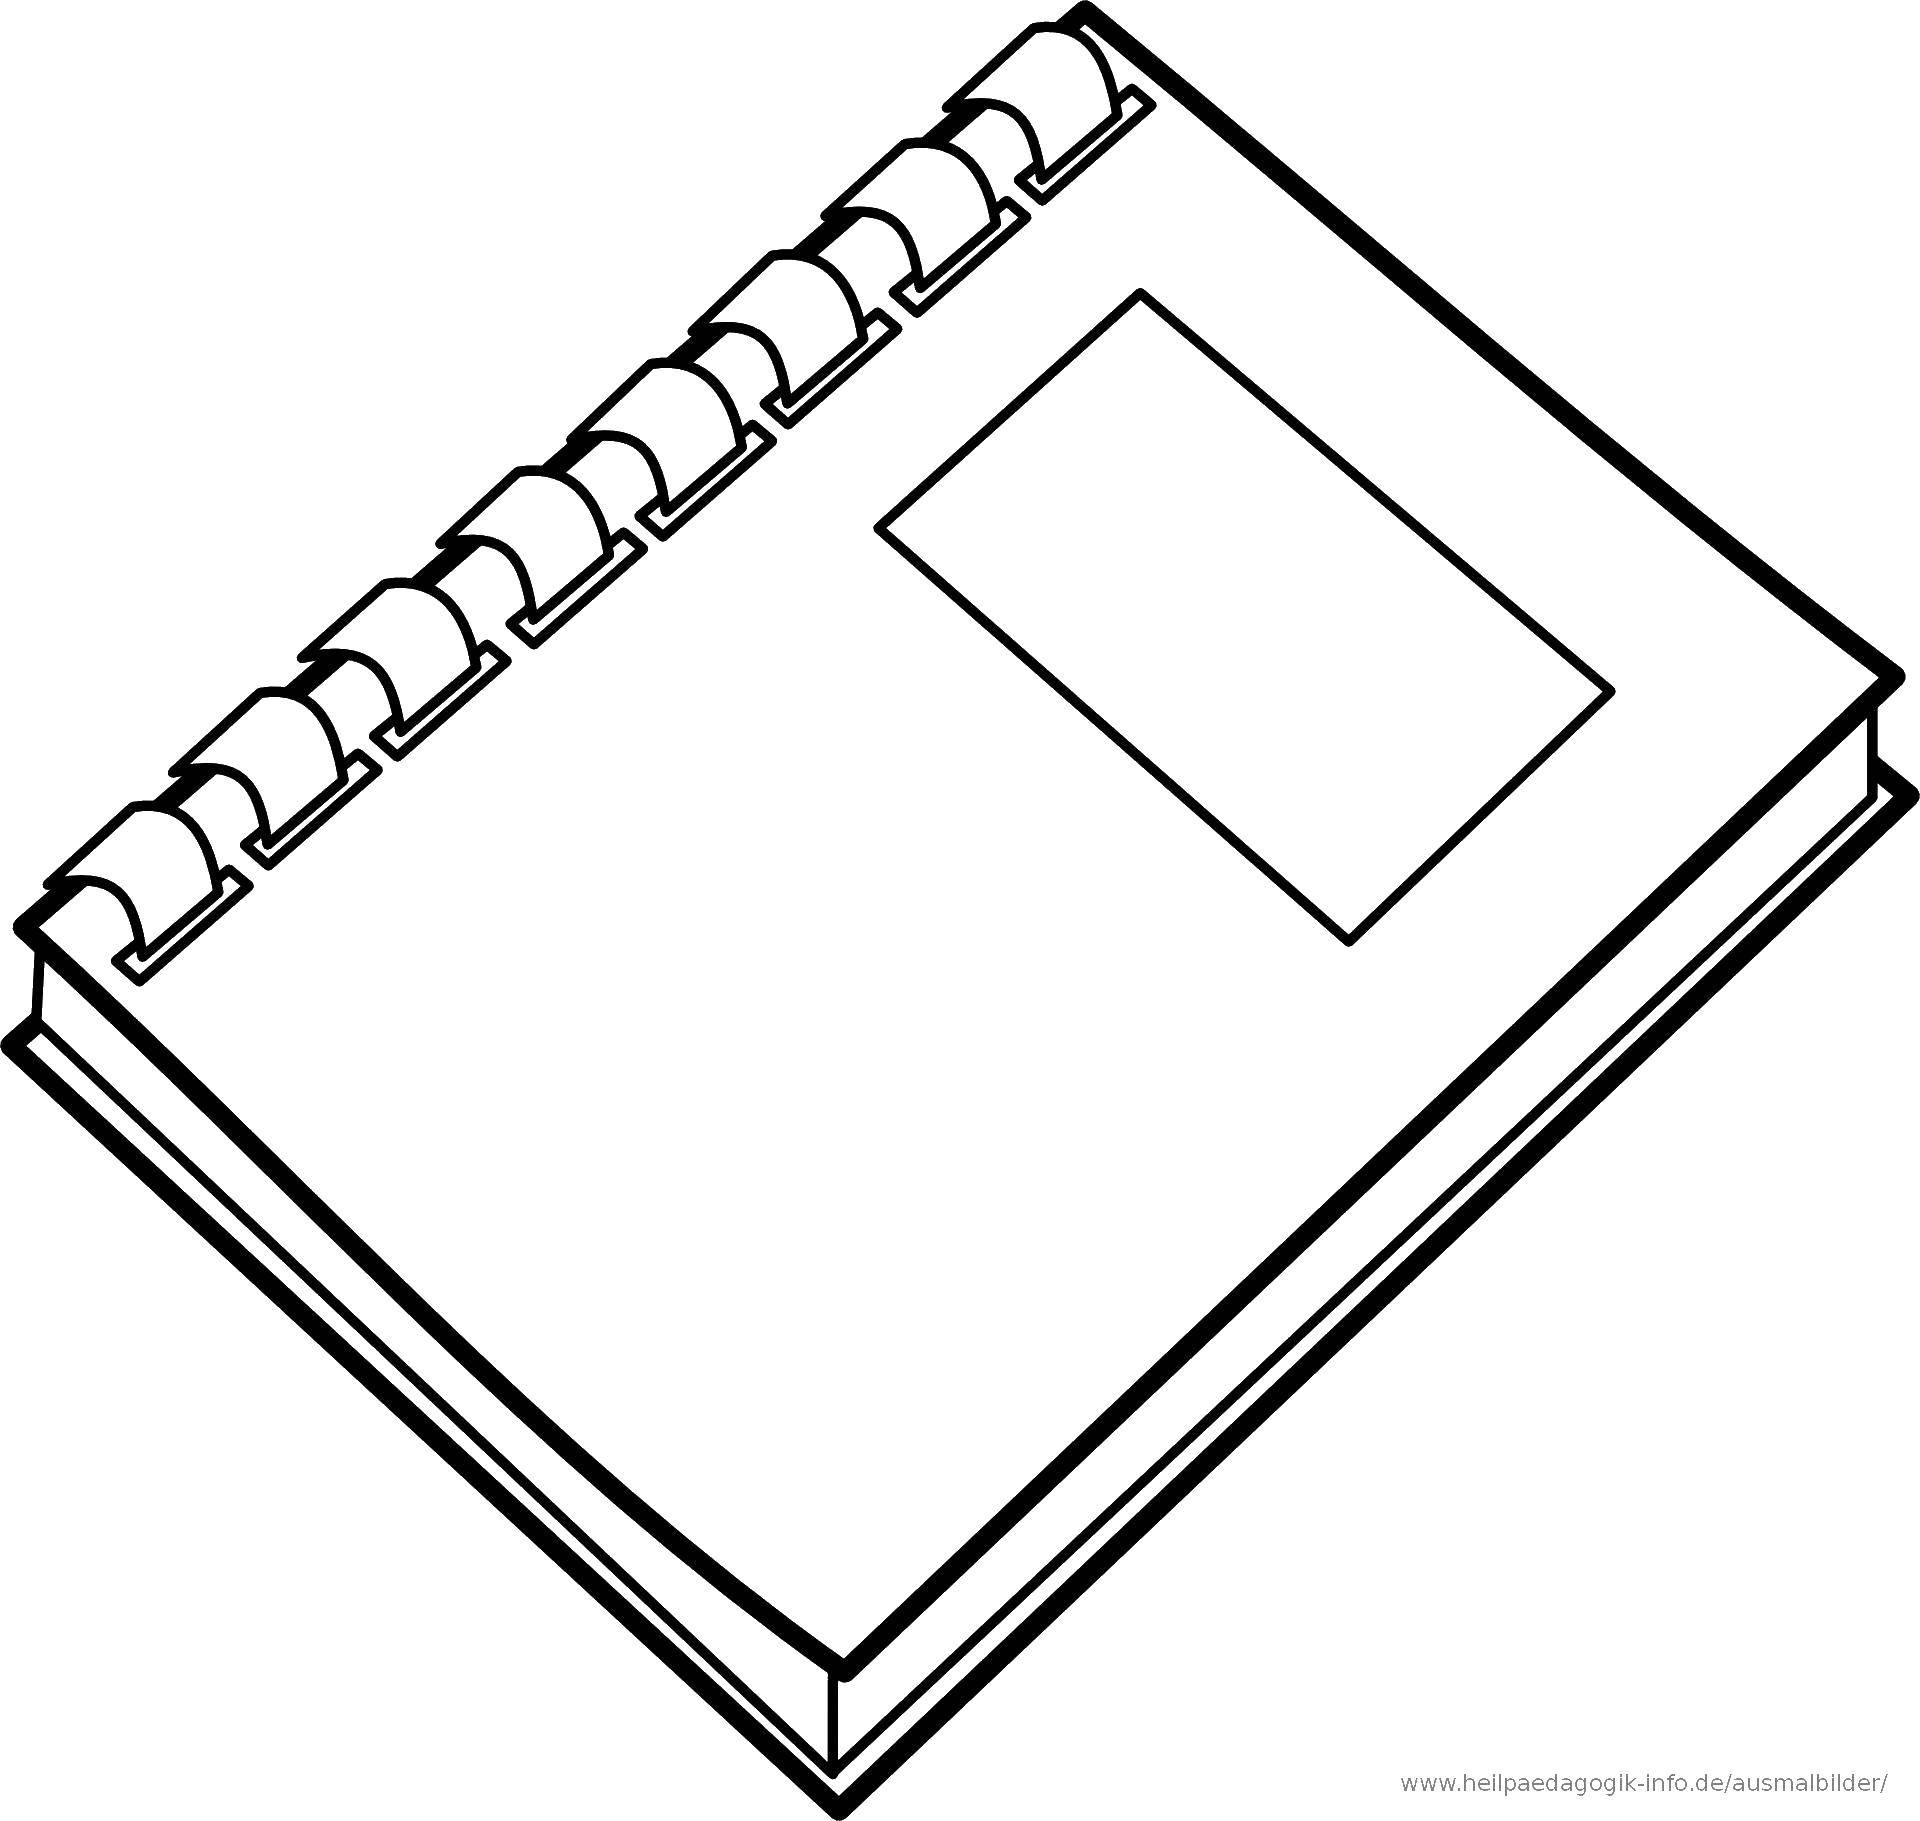 Coloring Notepad. Category school supplies. Tags:  Notepad, binder.